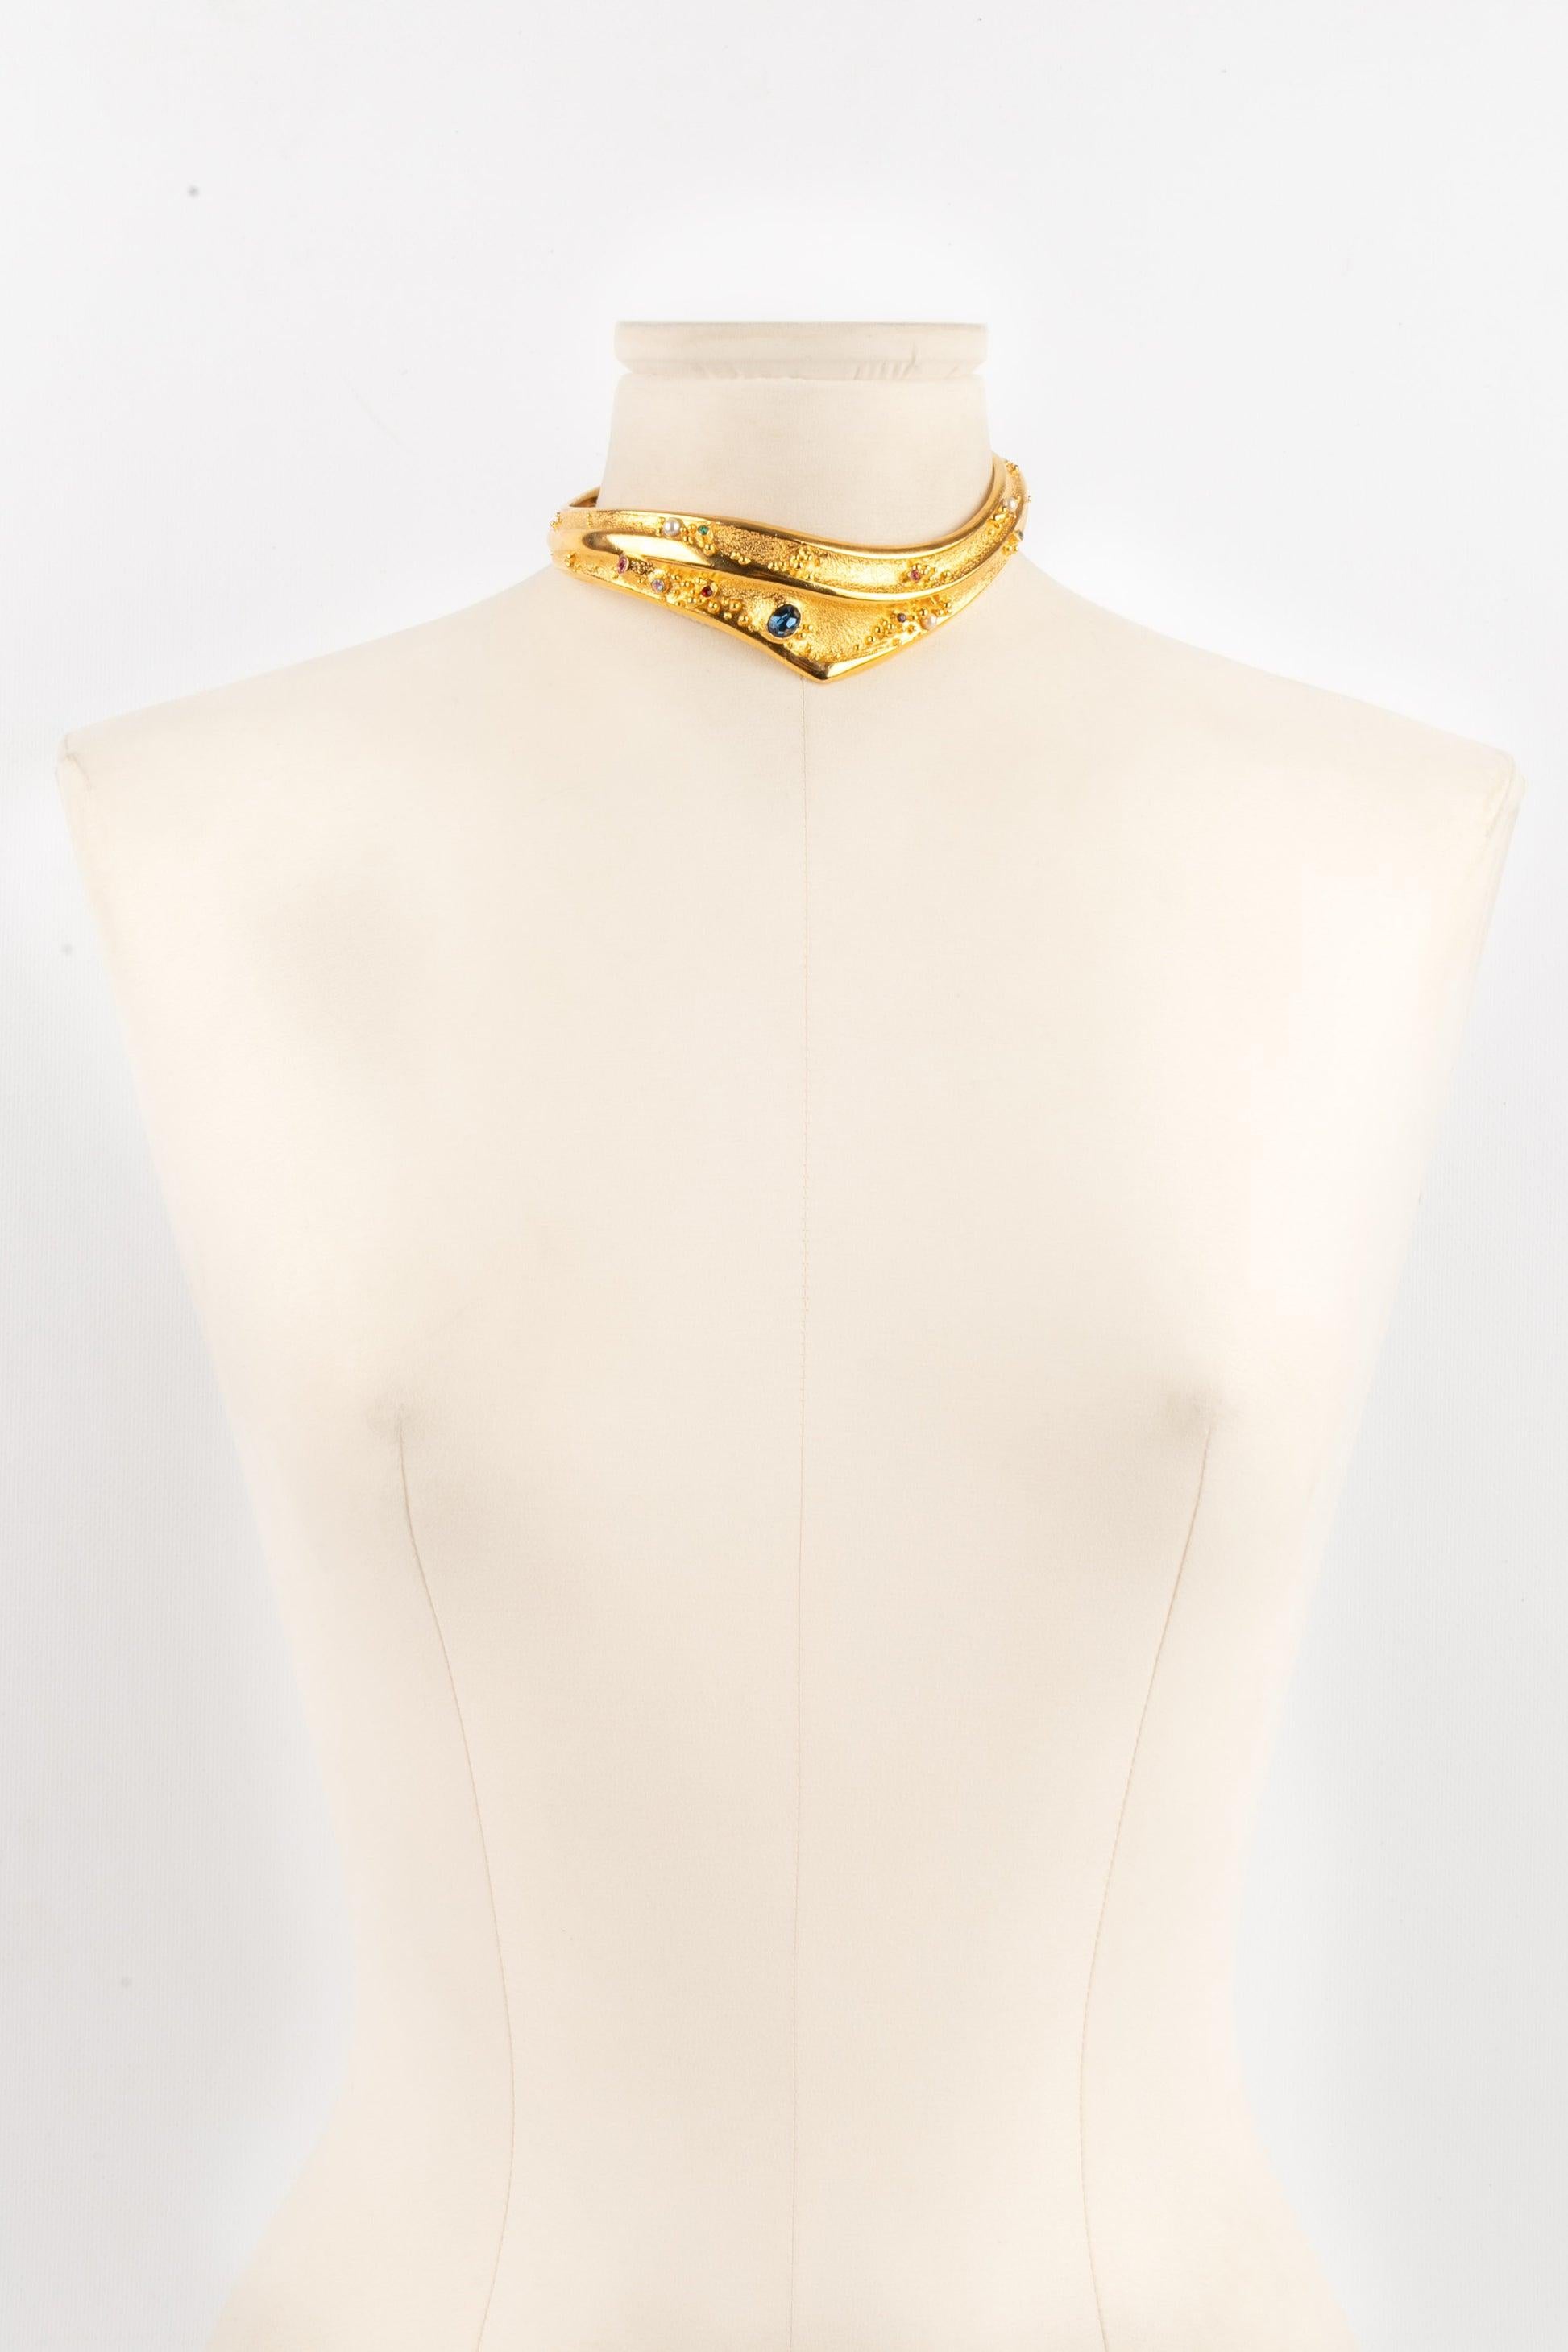 Christian Lacroix Golden Metal Short Necklace with Rhinestones  For Sale 5